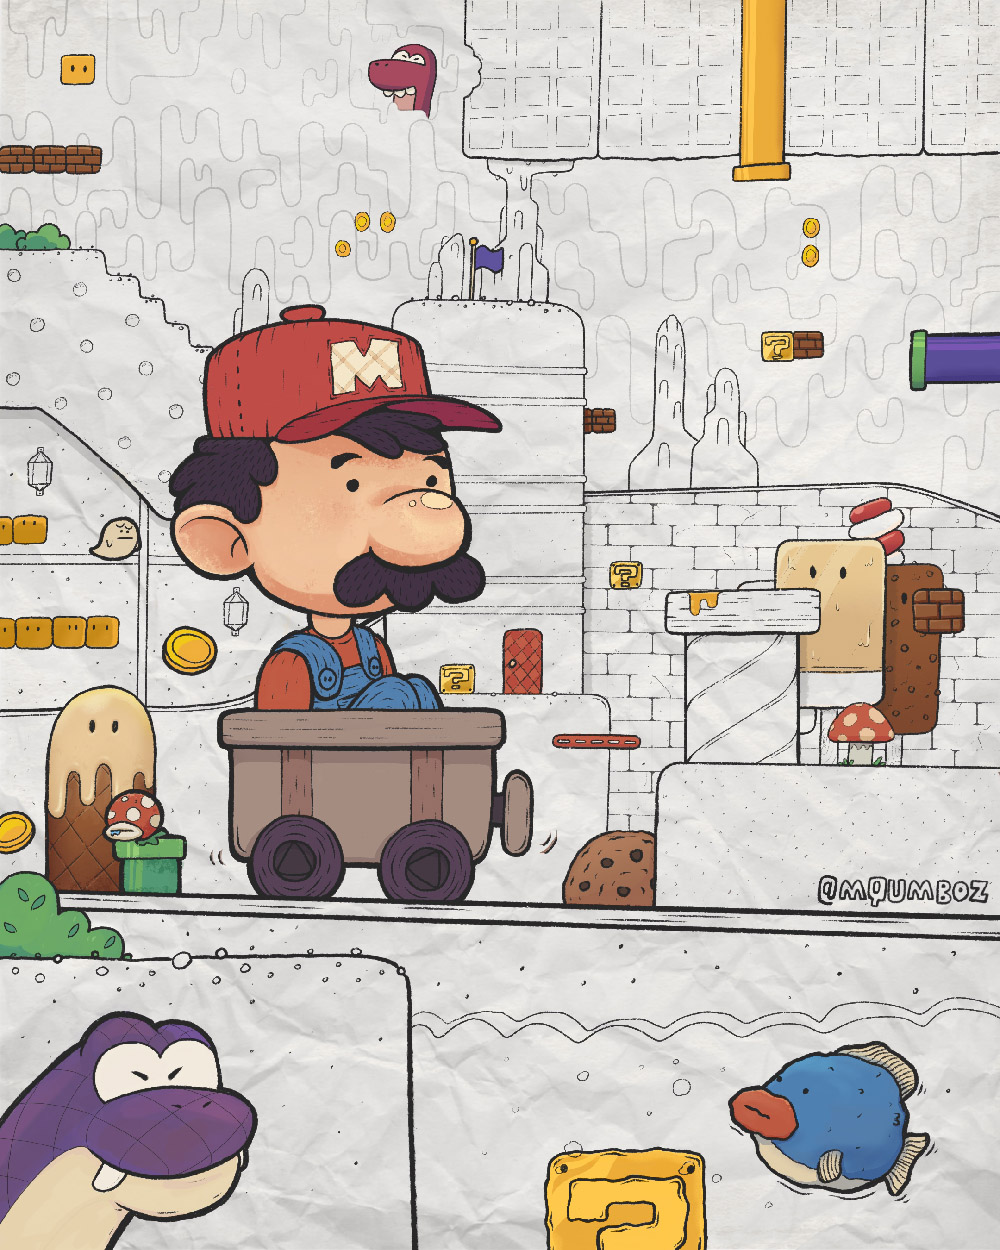 Nintendo super mario in a cart going in caves